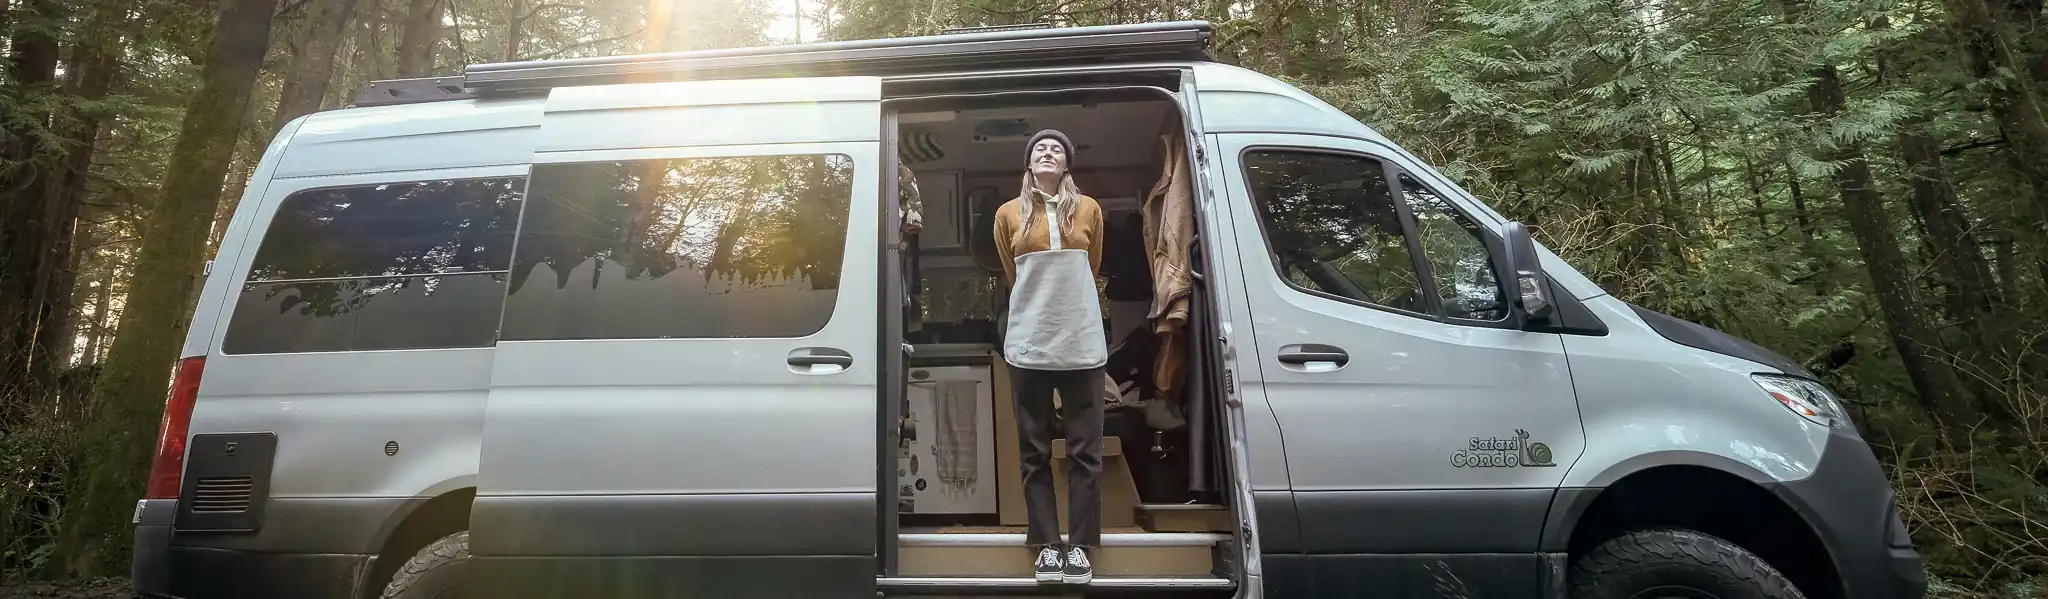 Embracing Eco-Friendly Van Lifestyles for Conversions